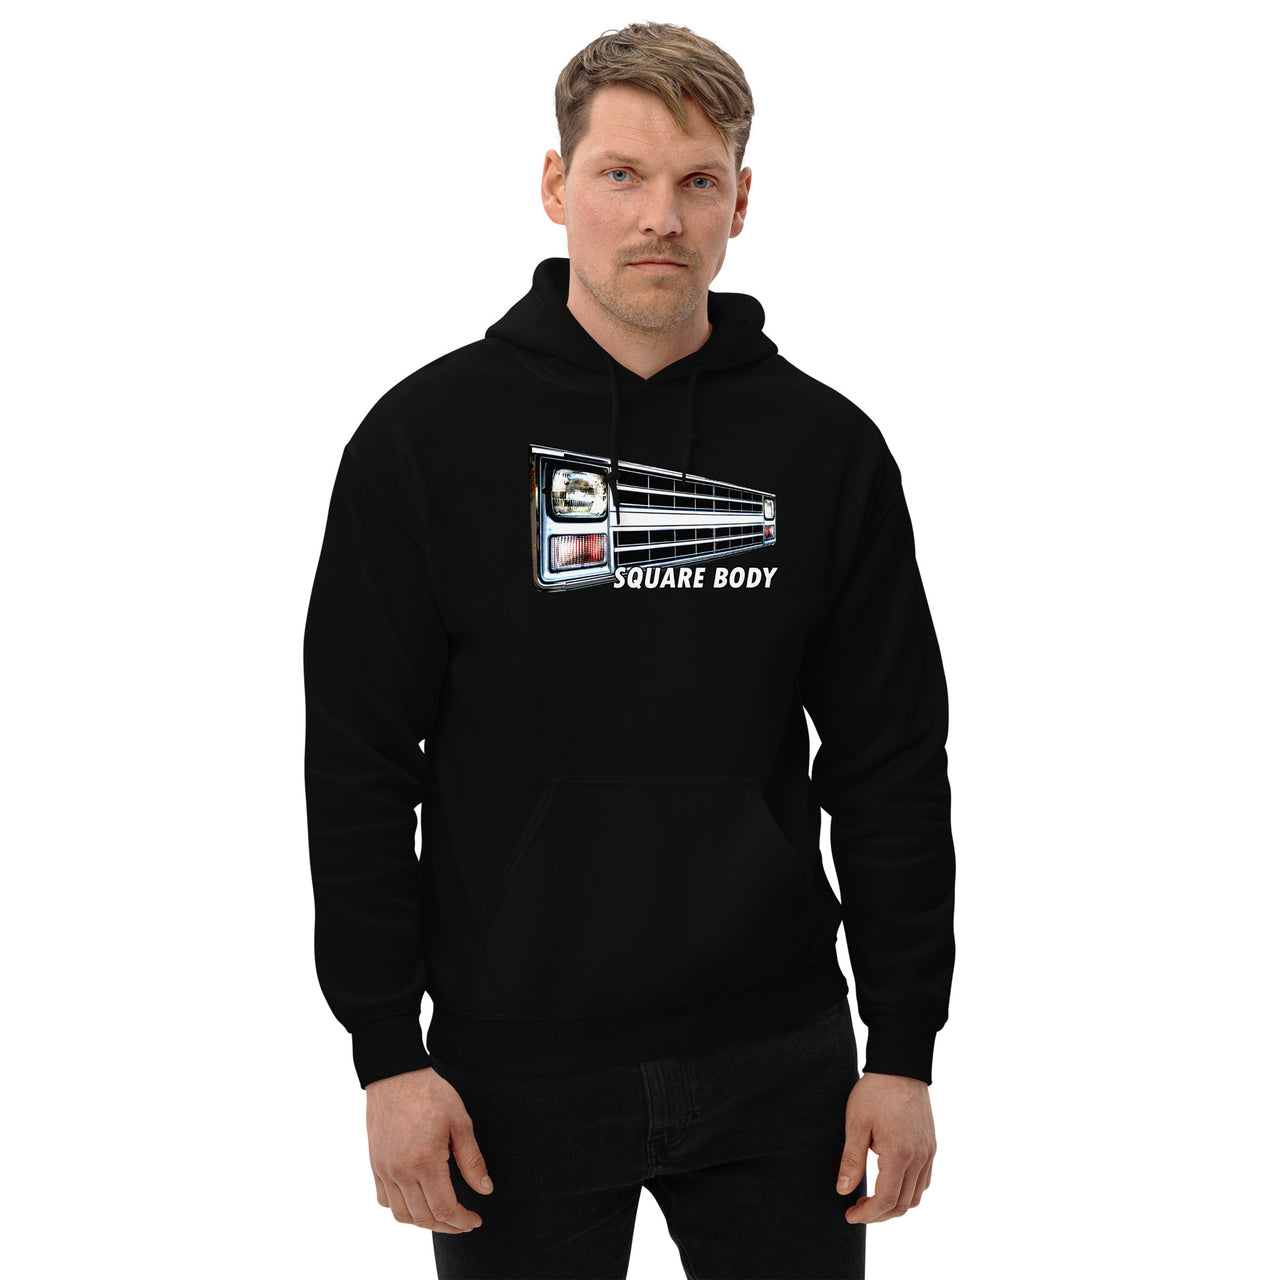 Square Body Truck 80s Angled Grille Hoodie modeled in black